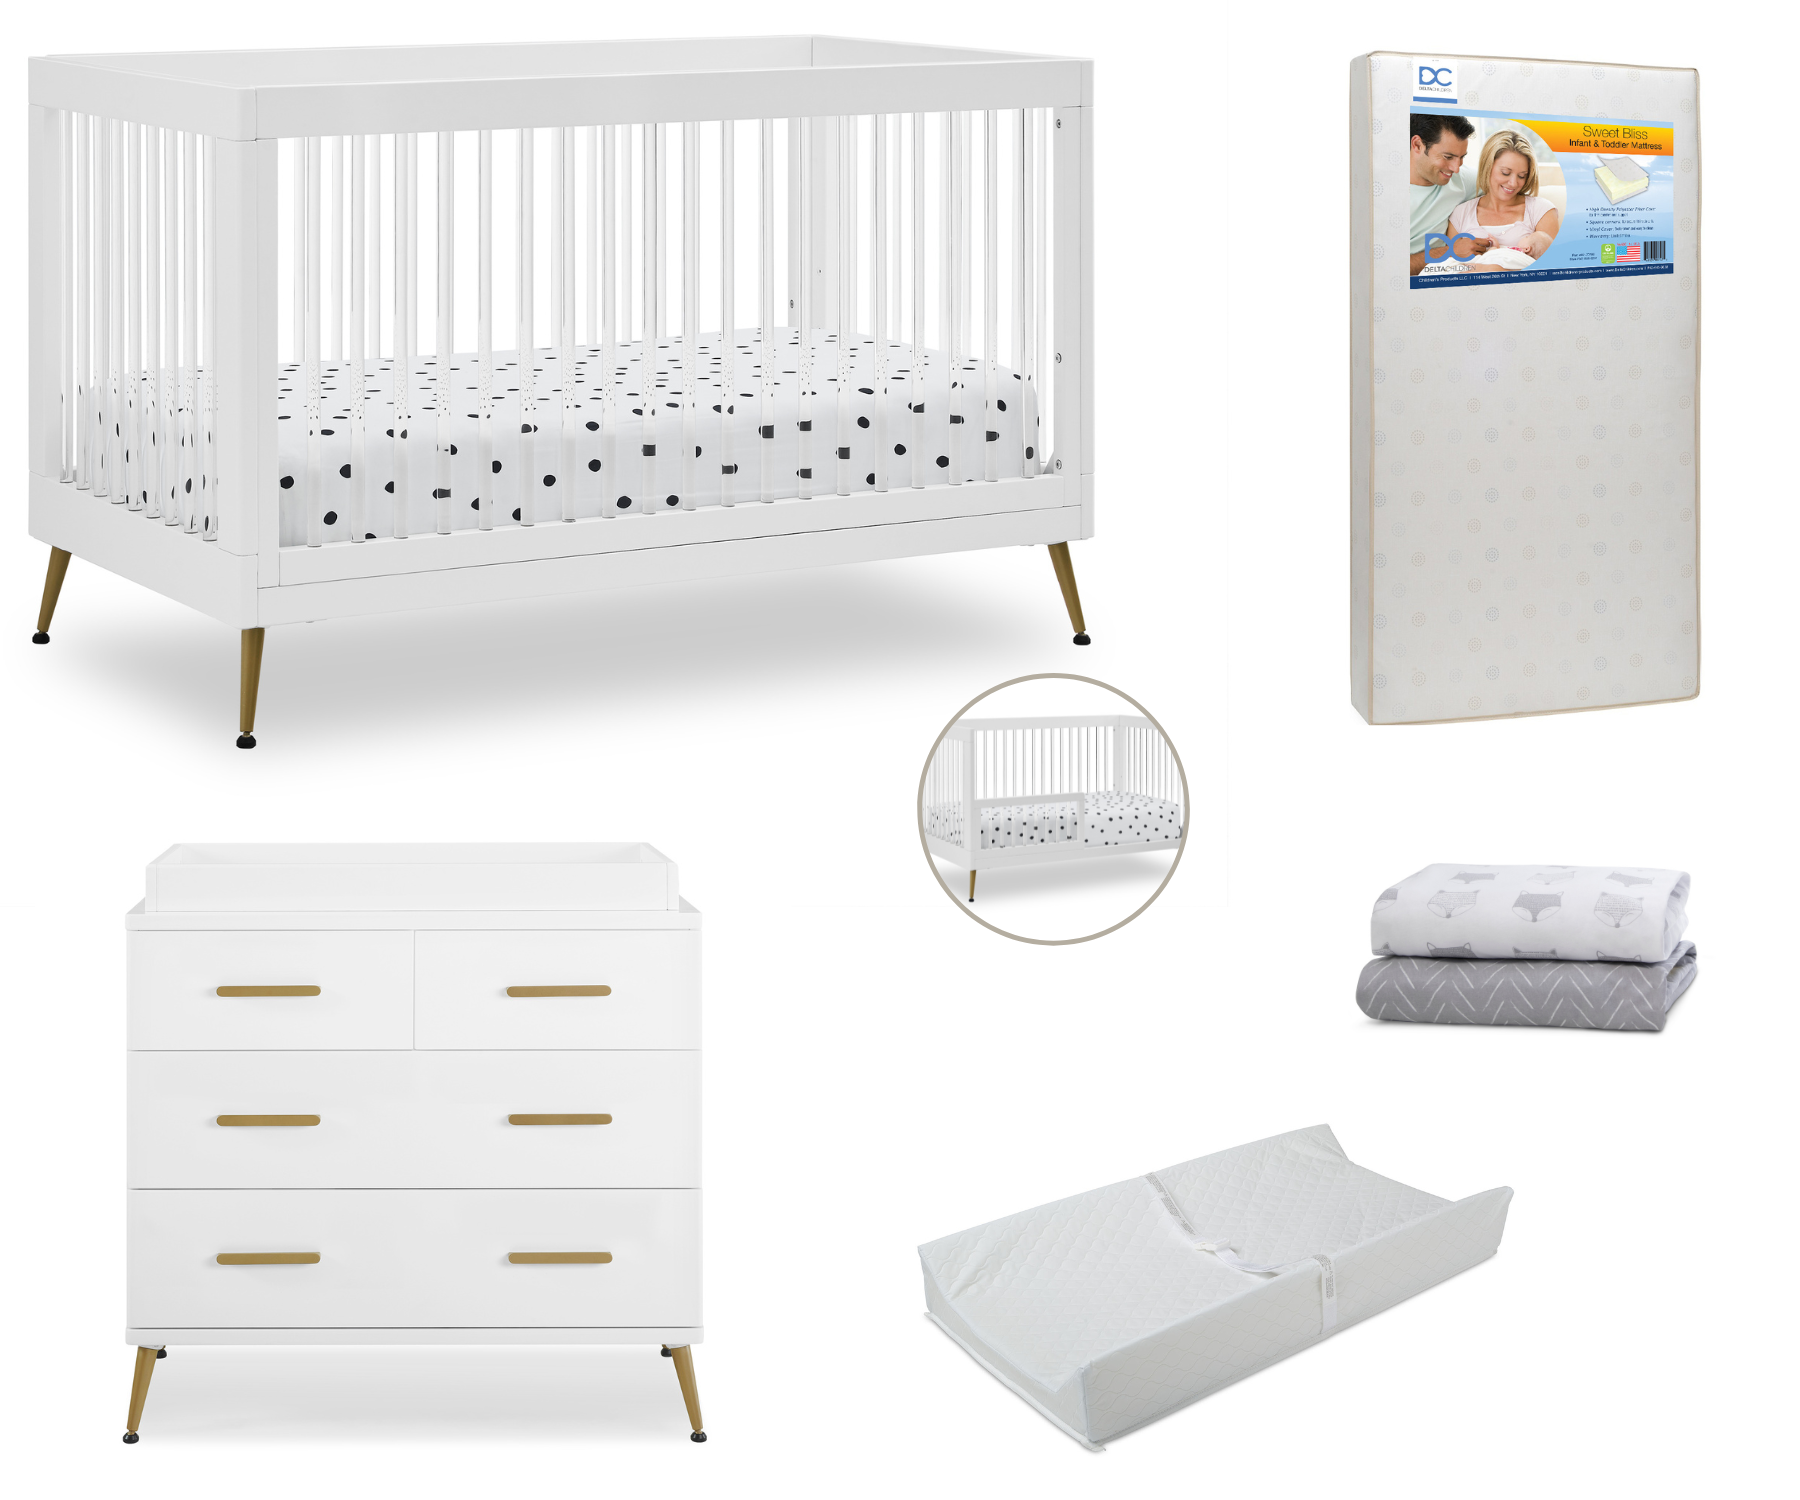 Delta Children Sloane Crib 7-Piece Baby Nursery Furniture Set–Includes: Convertible Crib, Dresser, Changing Top, Crib Mattress, Fitted Sheets, Toddler Guardrail & Changing Pad, White w/Melted Bronze - image 1 of 5